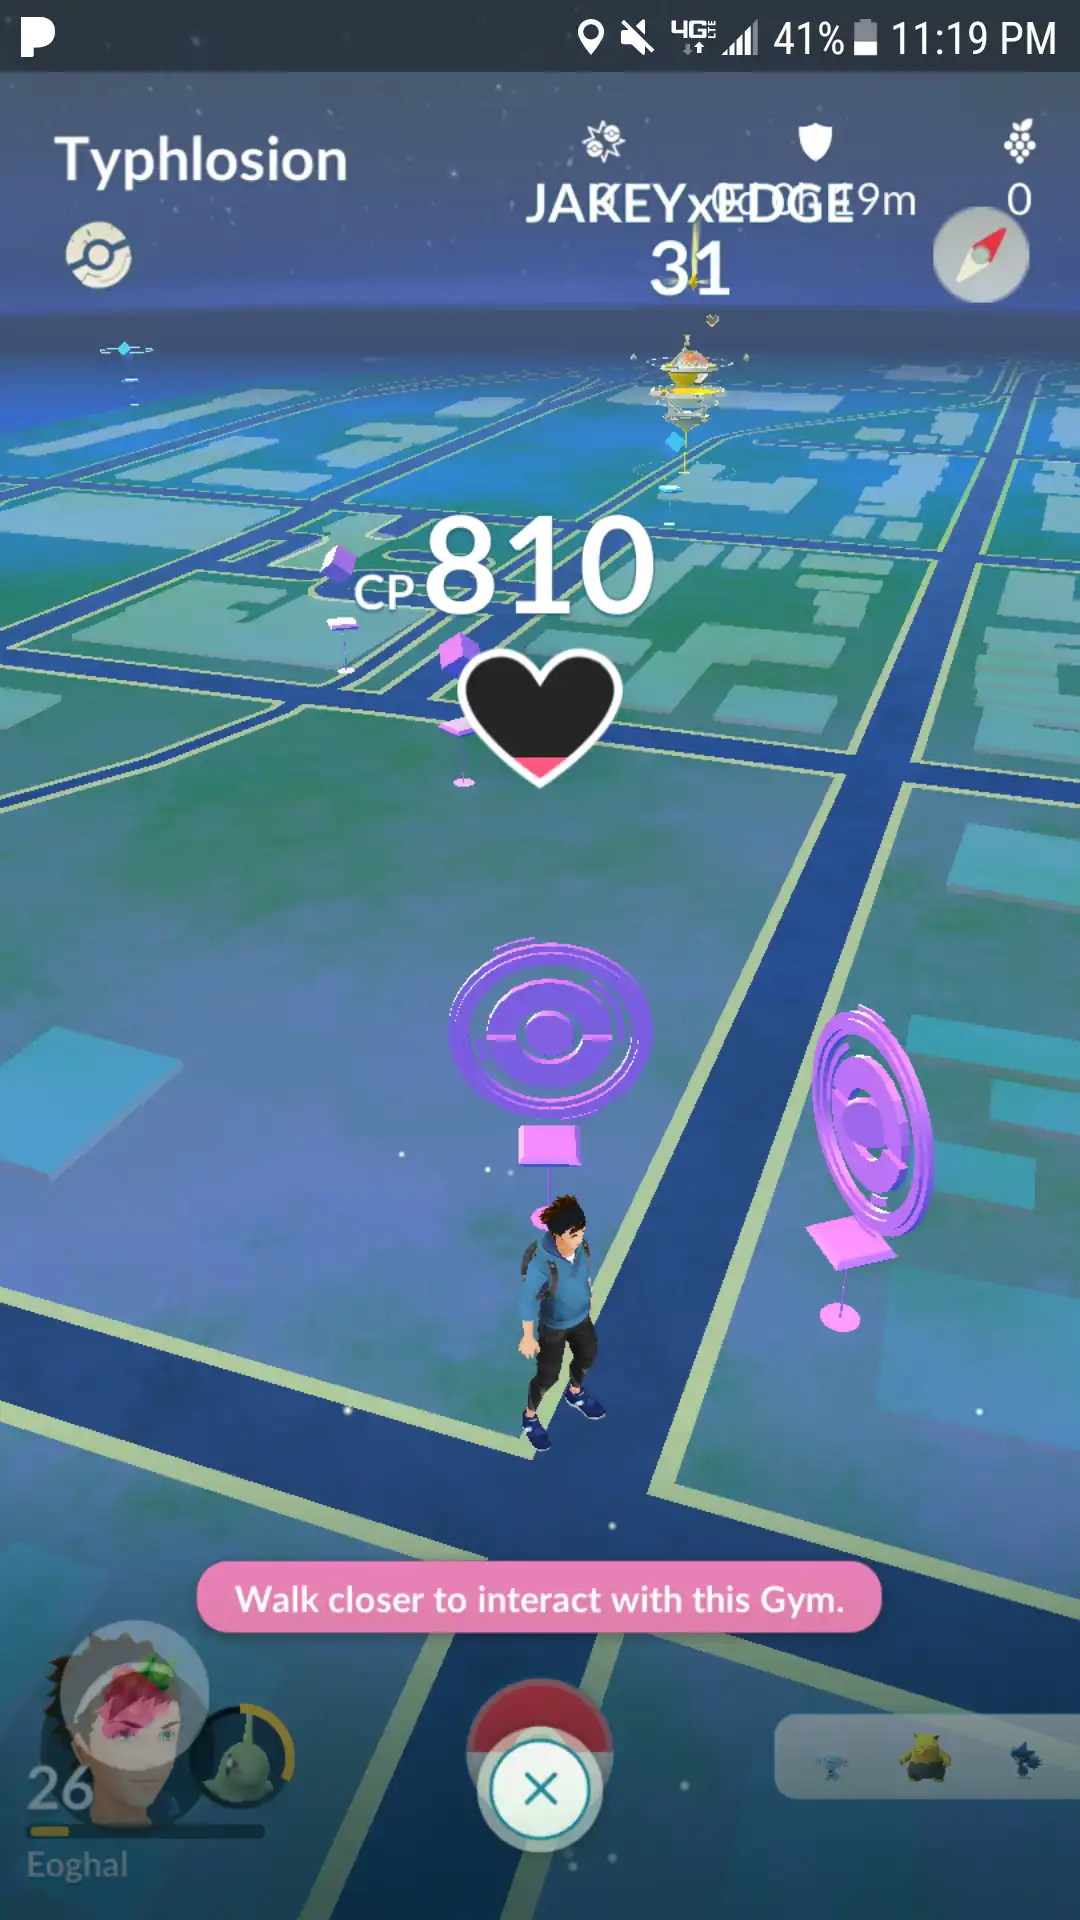 [Bug] Clicking on a Pokemon as it